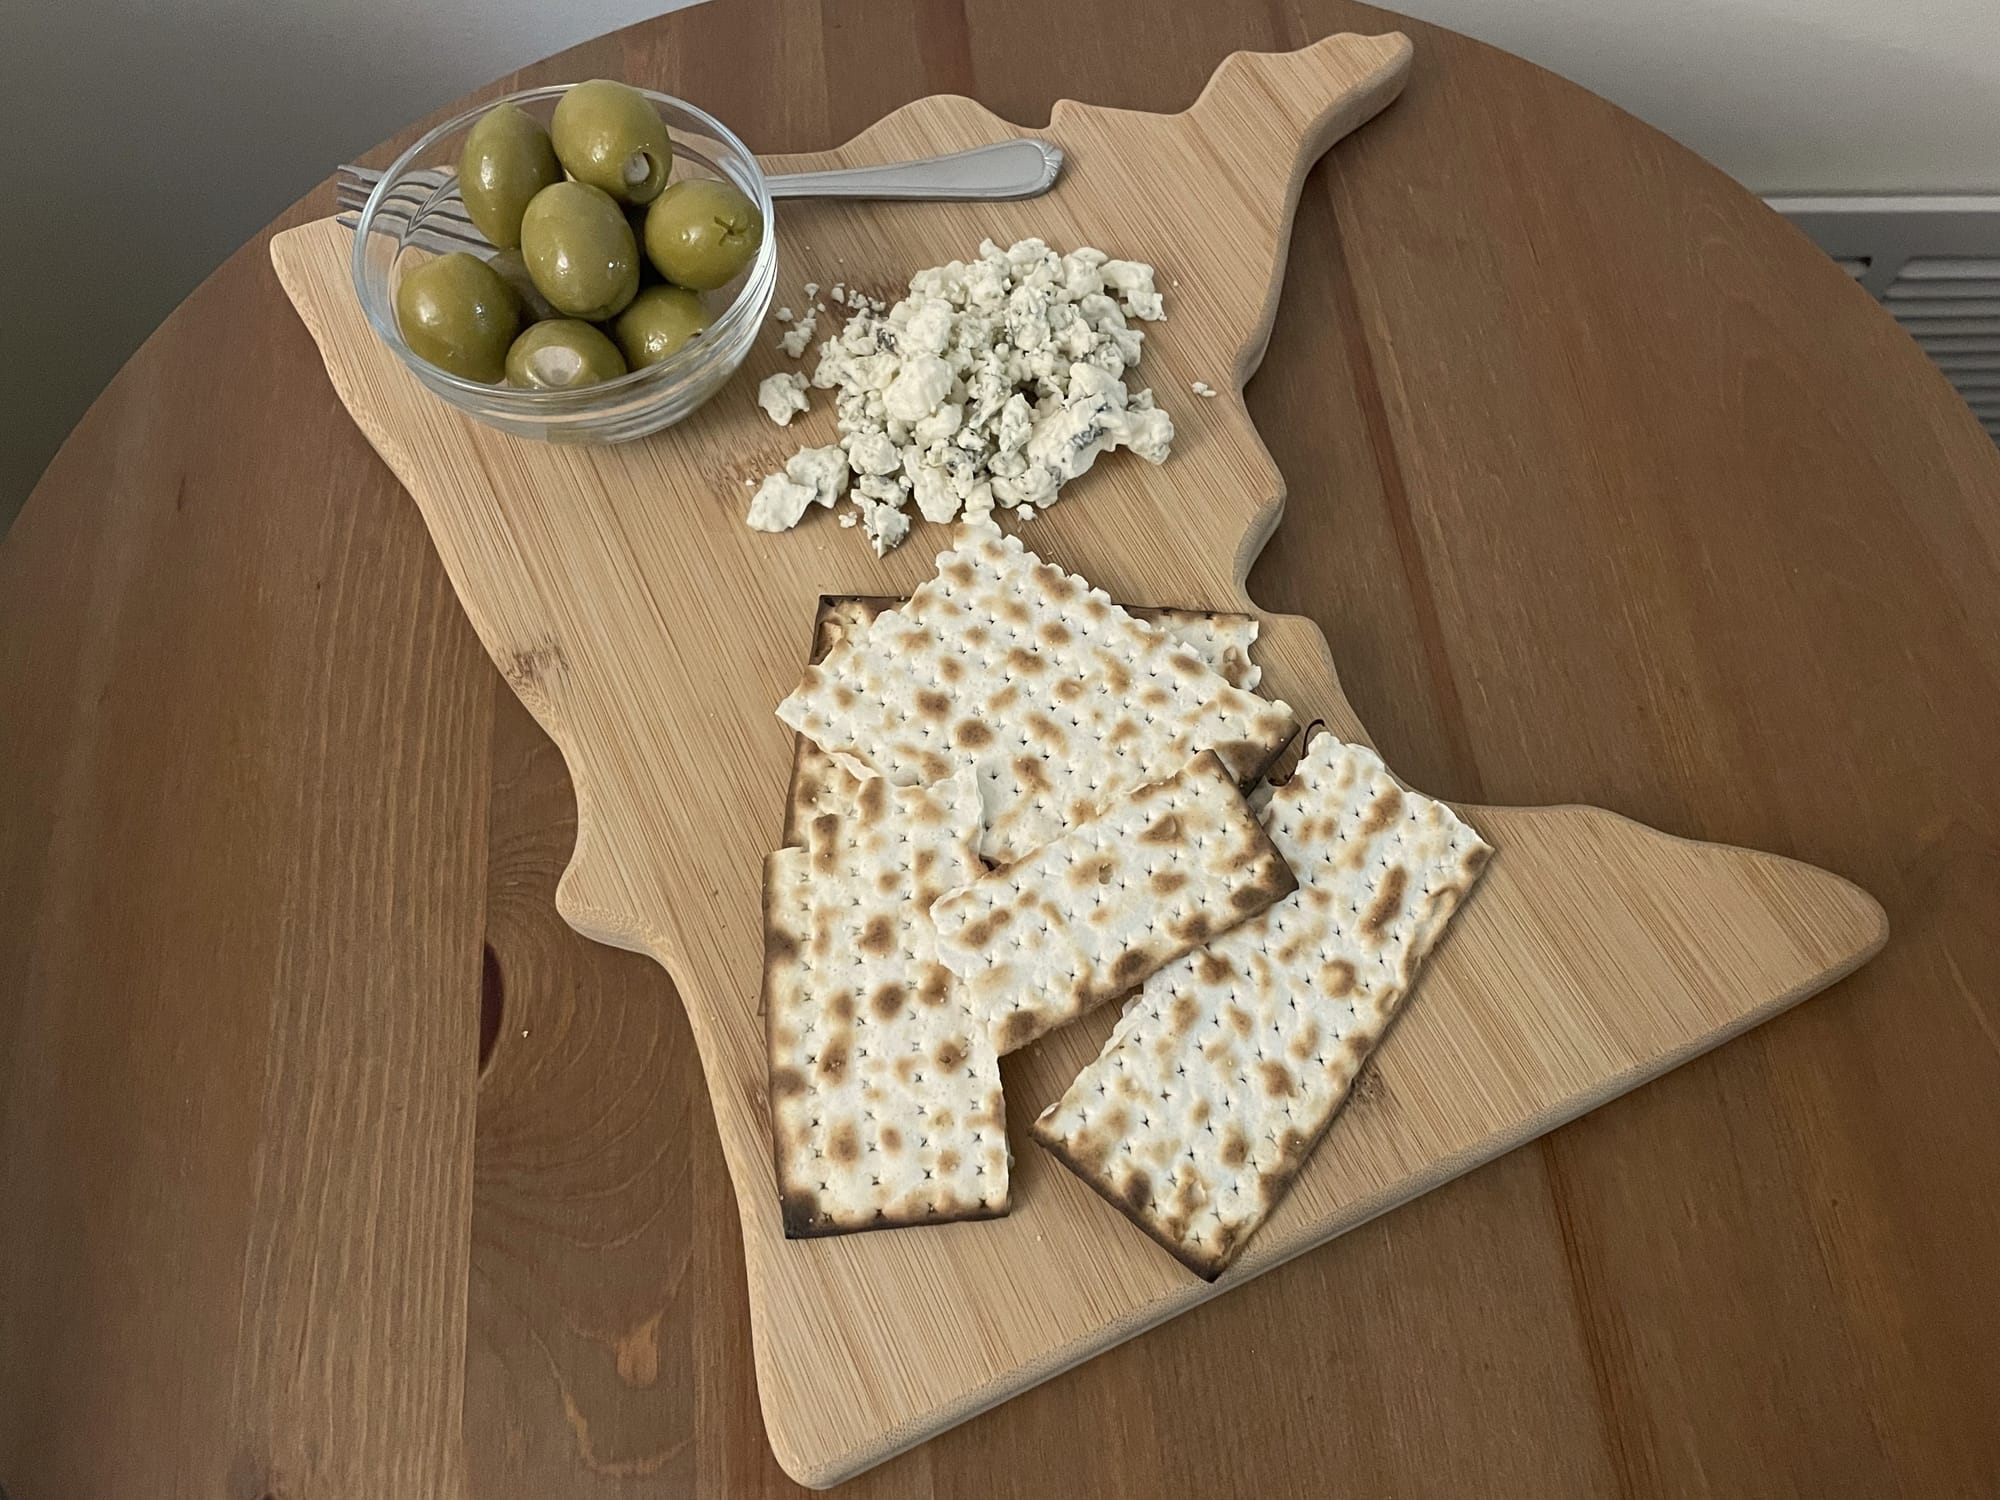 Serving board shaped like Minnesota with pieces of matzah, crumbled blue cheese, and a small bowl of olives on top